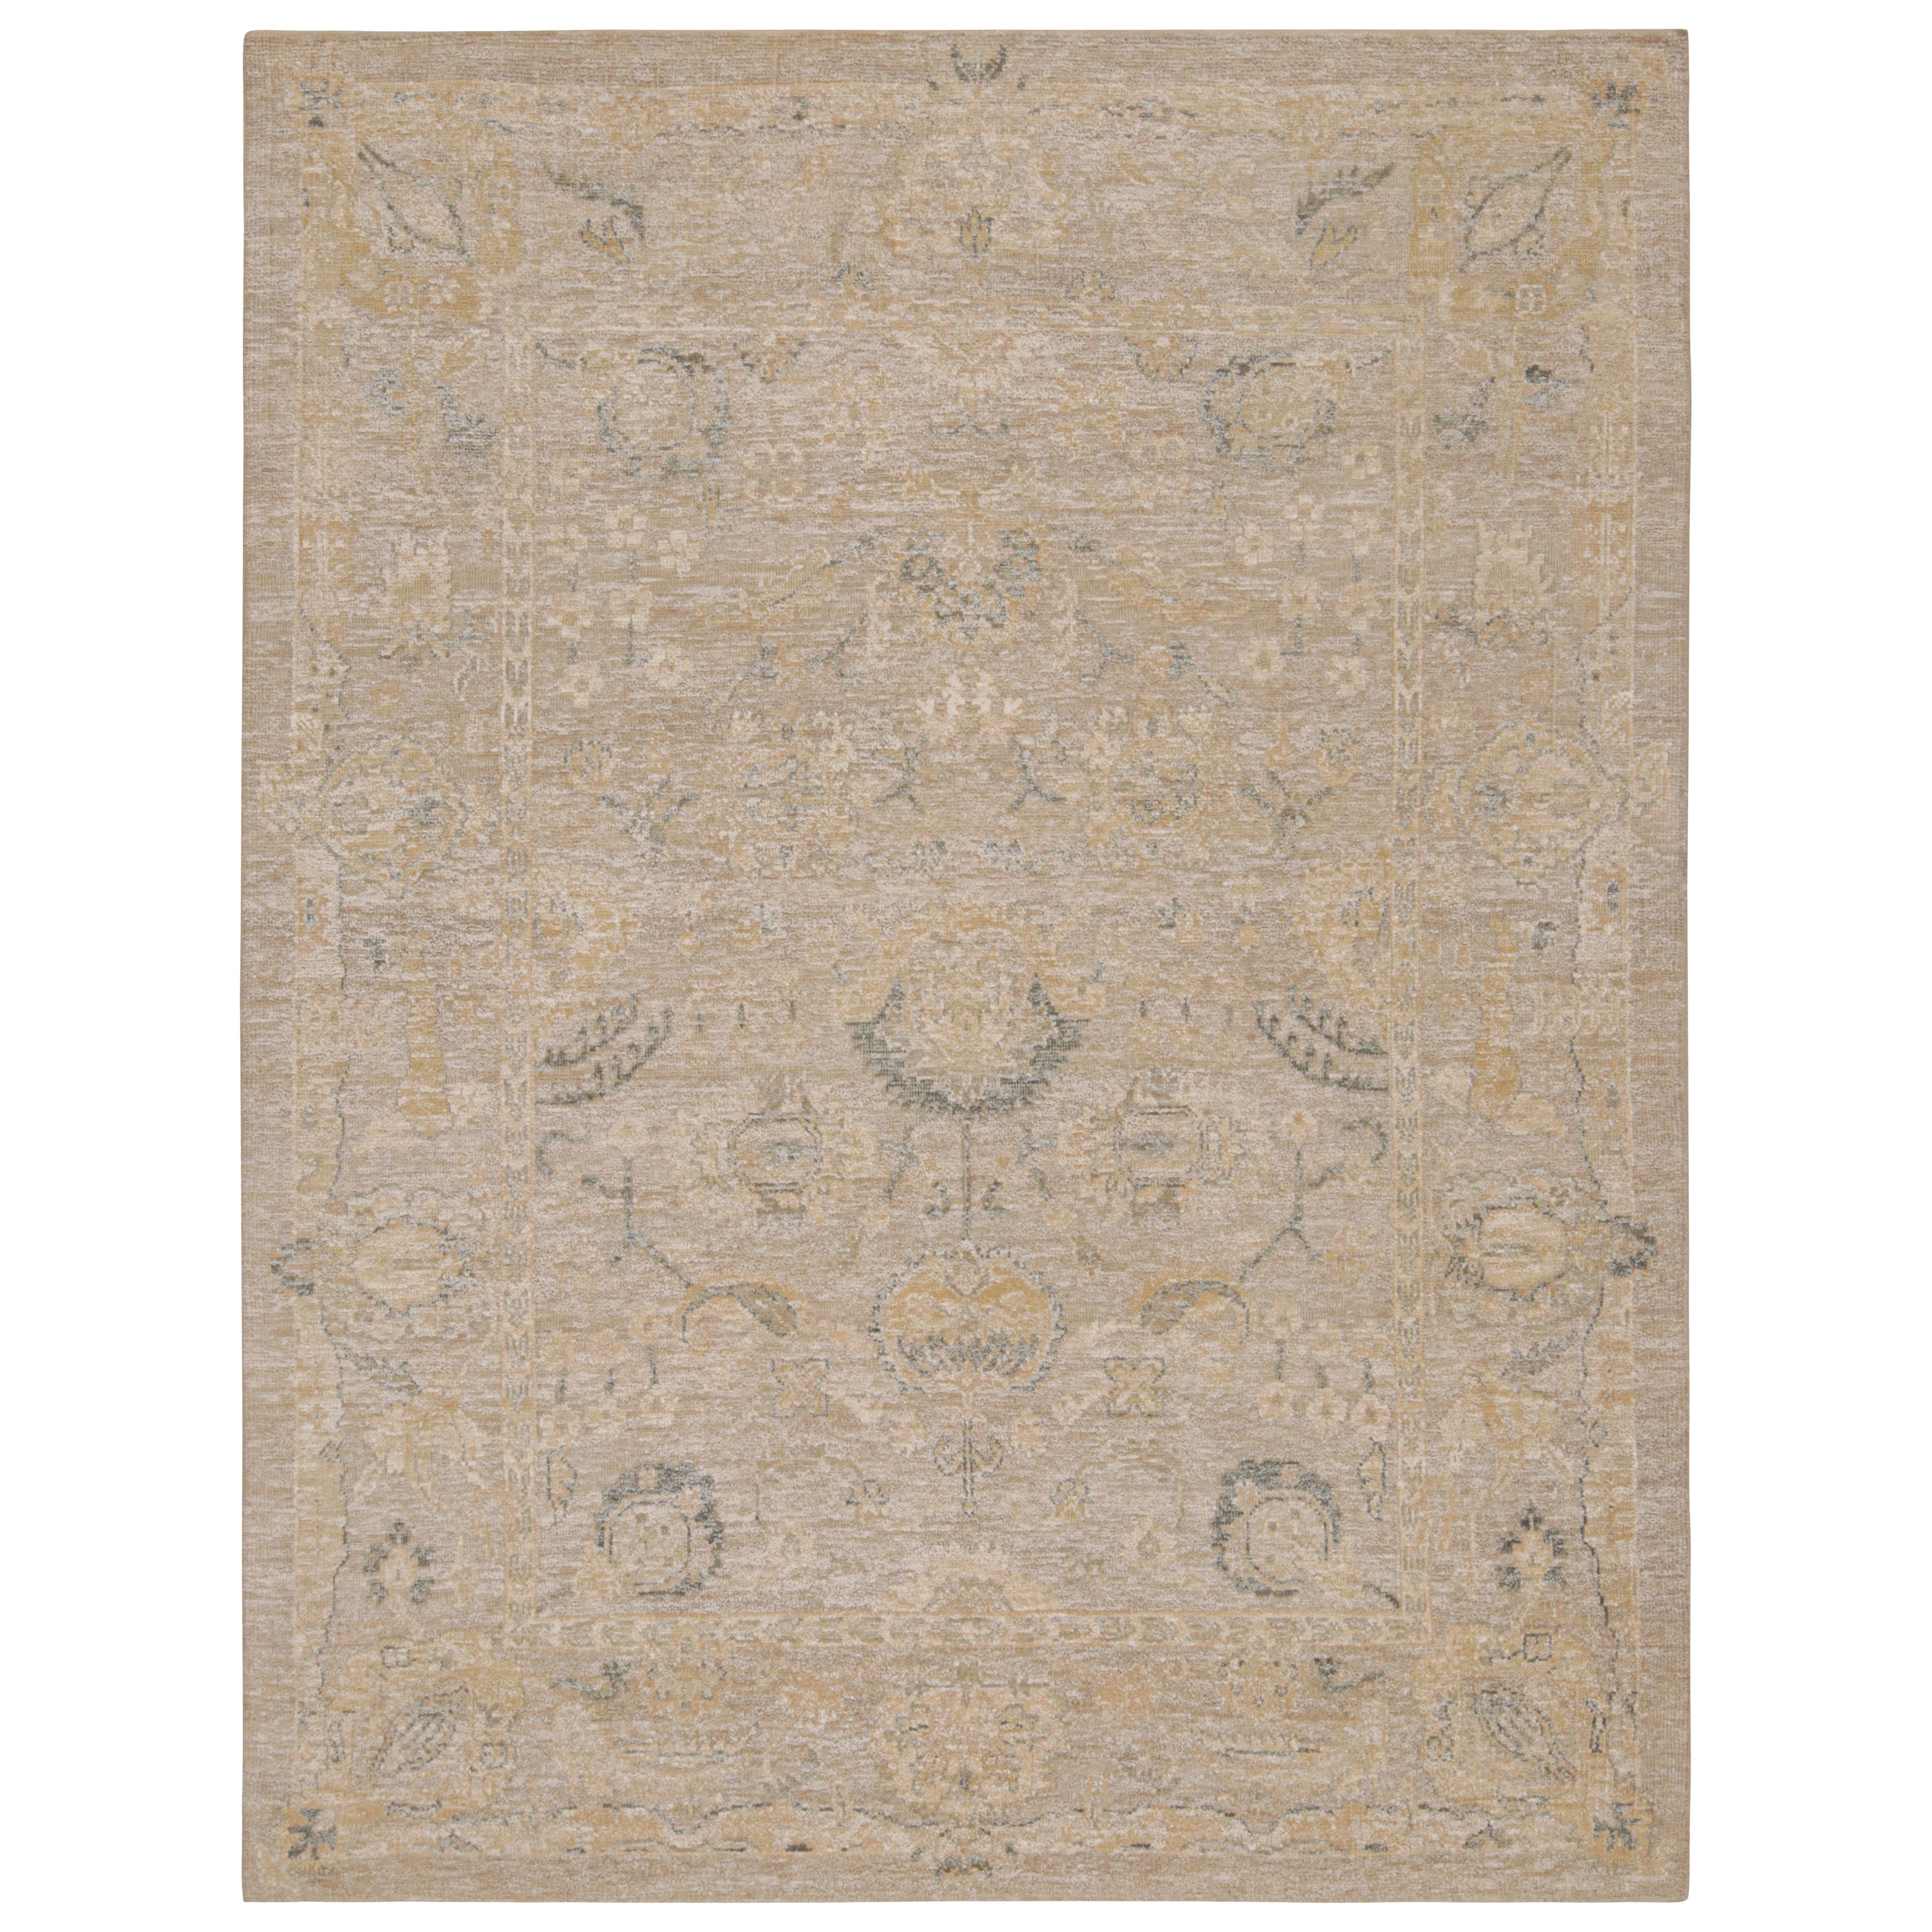 Rug & Kilim’s Oushak Style Rug In Beige-Brown and Gray with Floral Patterns For Sale